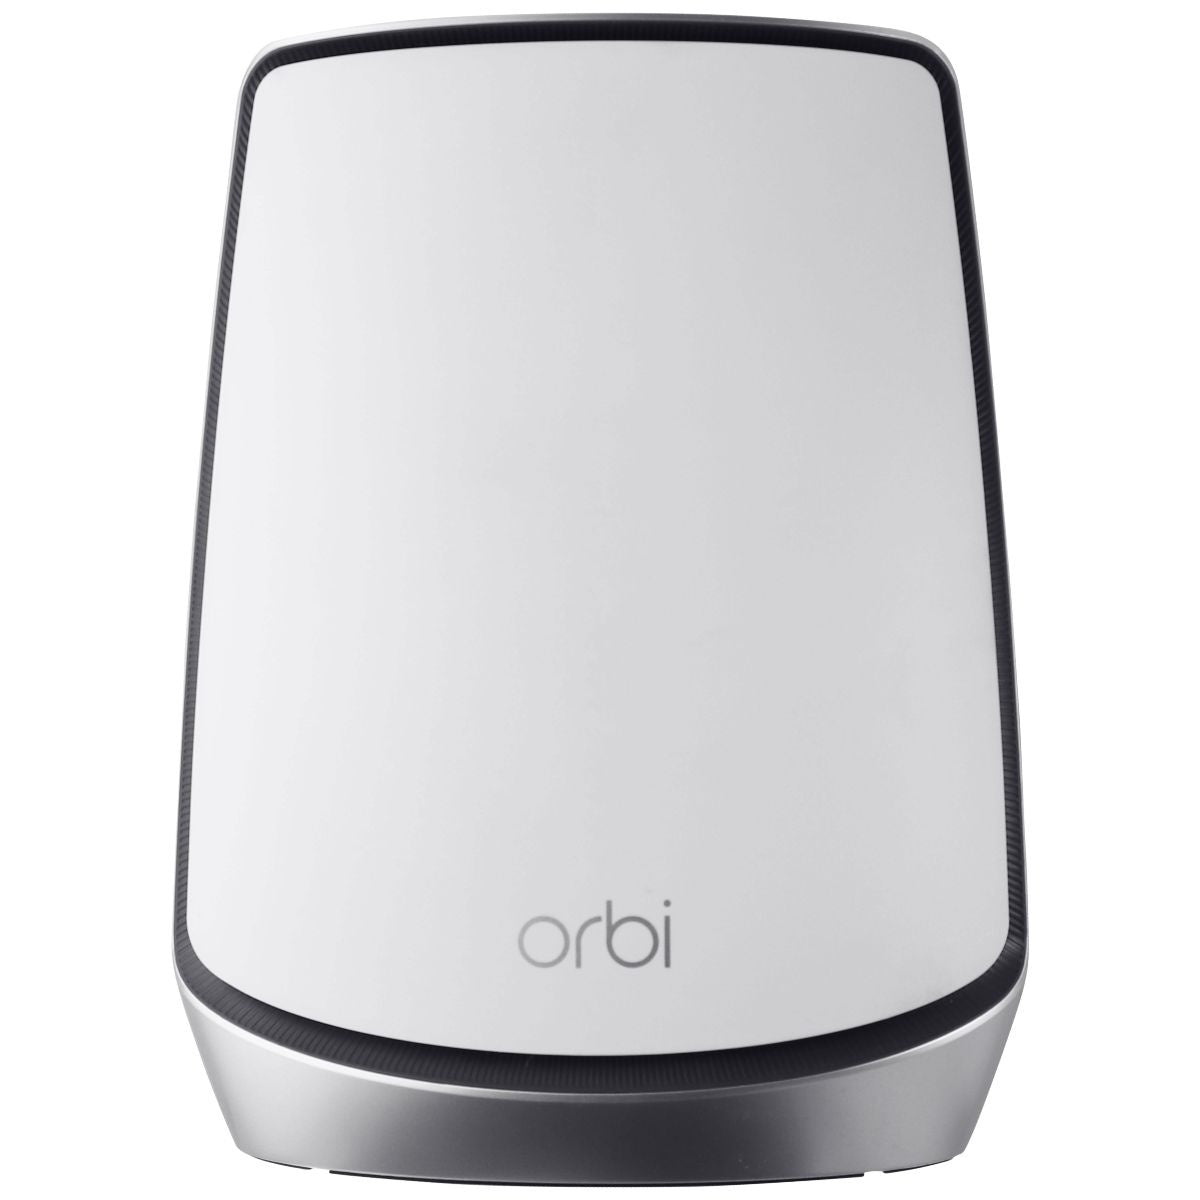 NETGEAR Orbi Whole Home AX6000 Tri-band Mesh WiFi 6 System (RBK852) Modem-Router Combos Netgear    - Simple Cell Bulk Wholesale Pricing - USA Seller